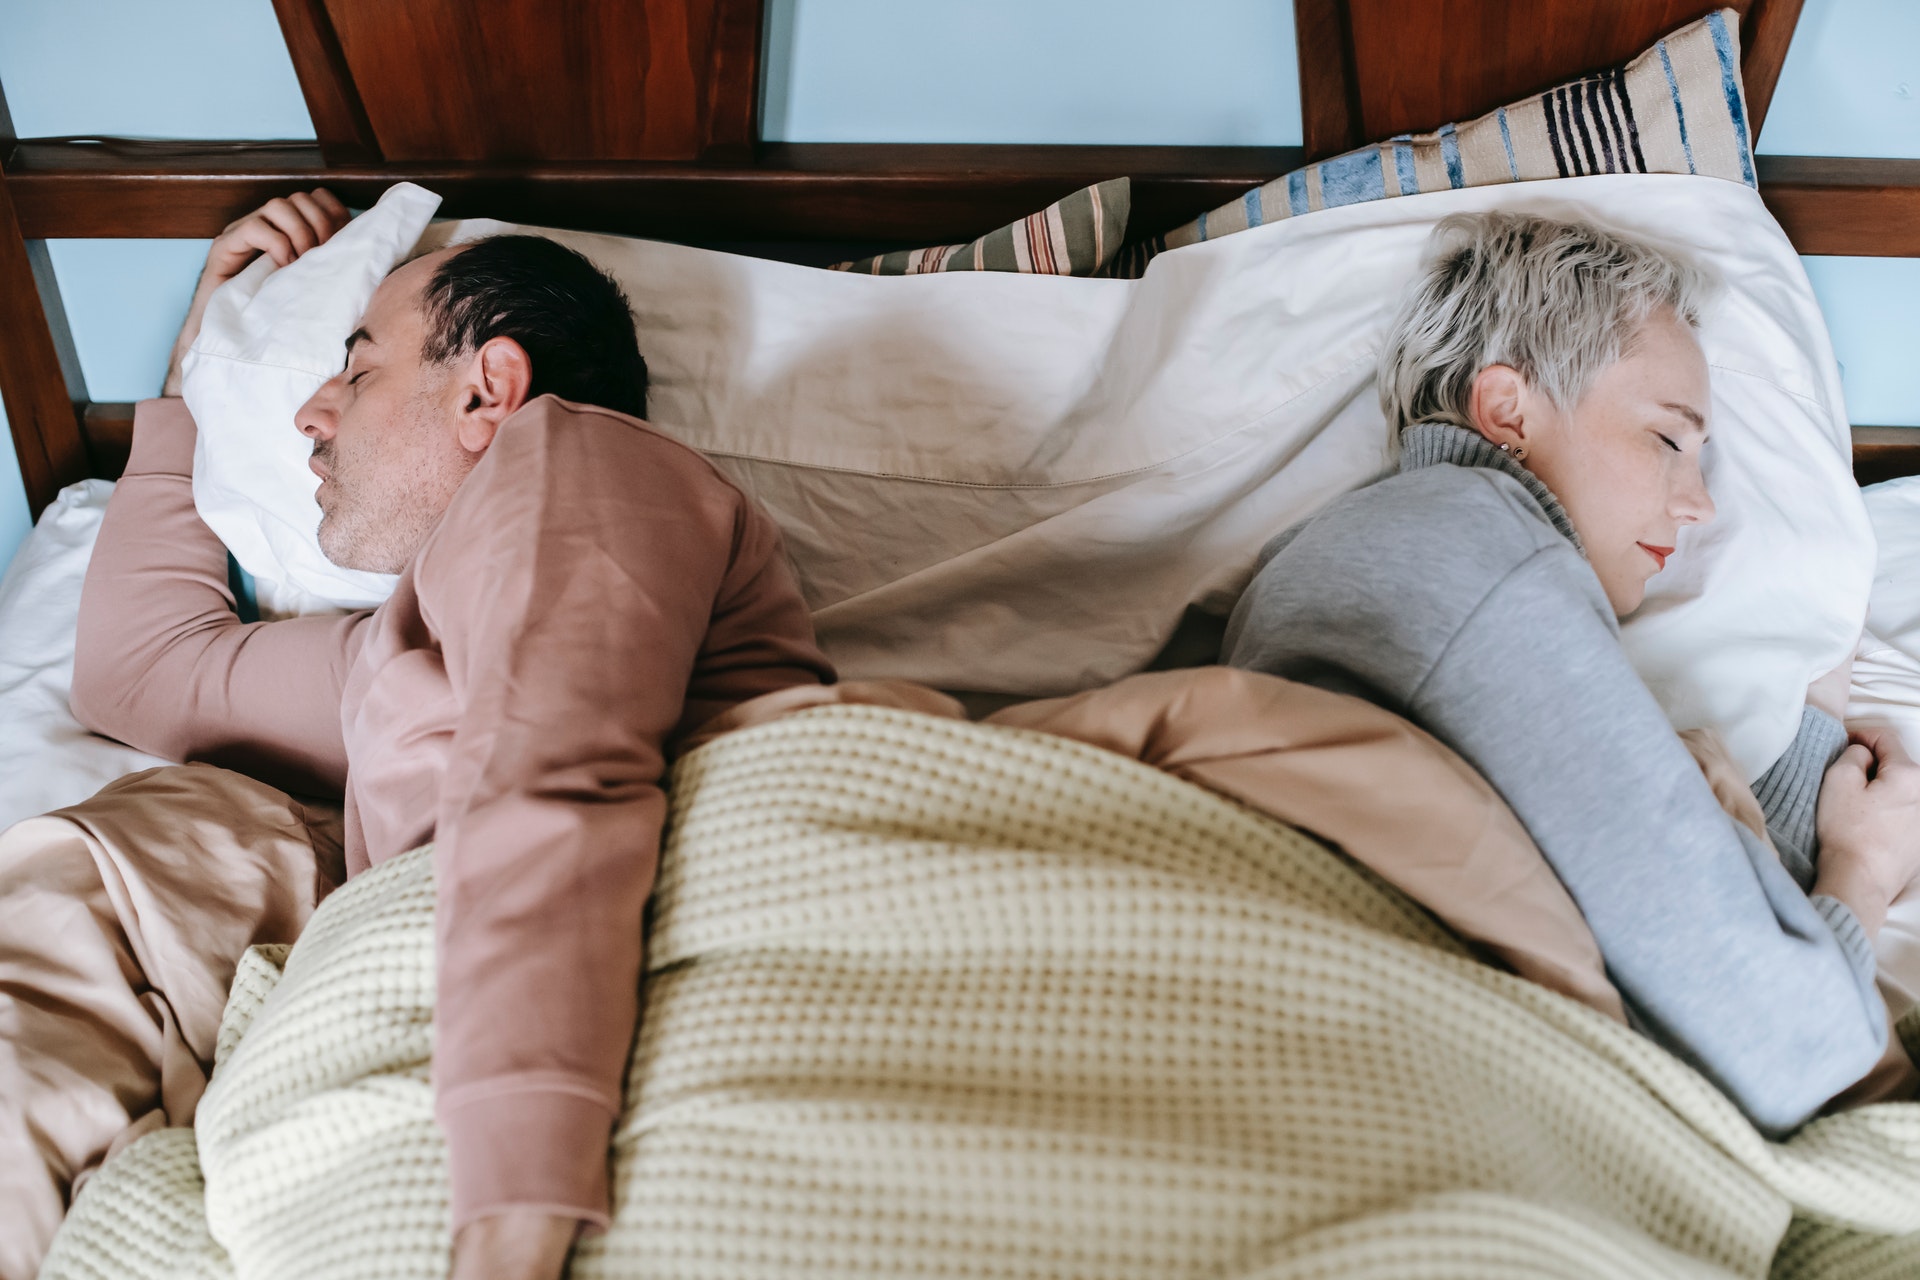 can happy couples sleep in different beds?